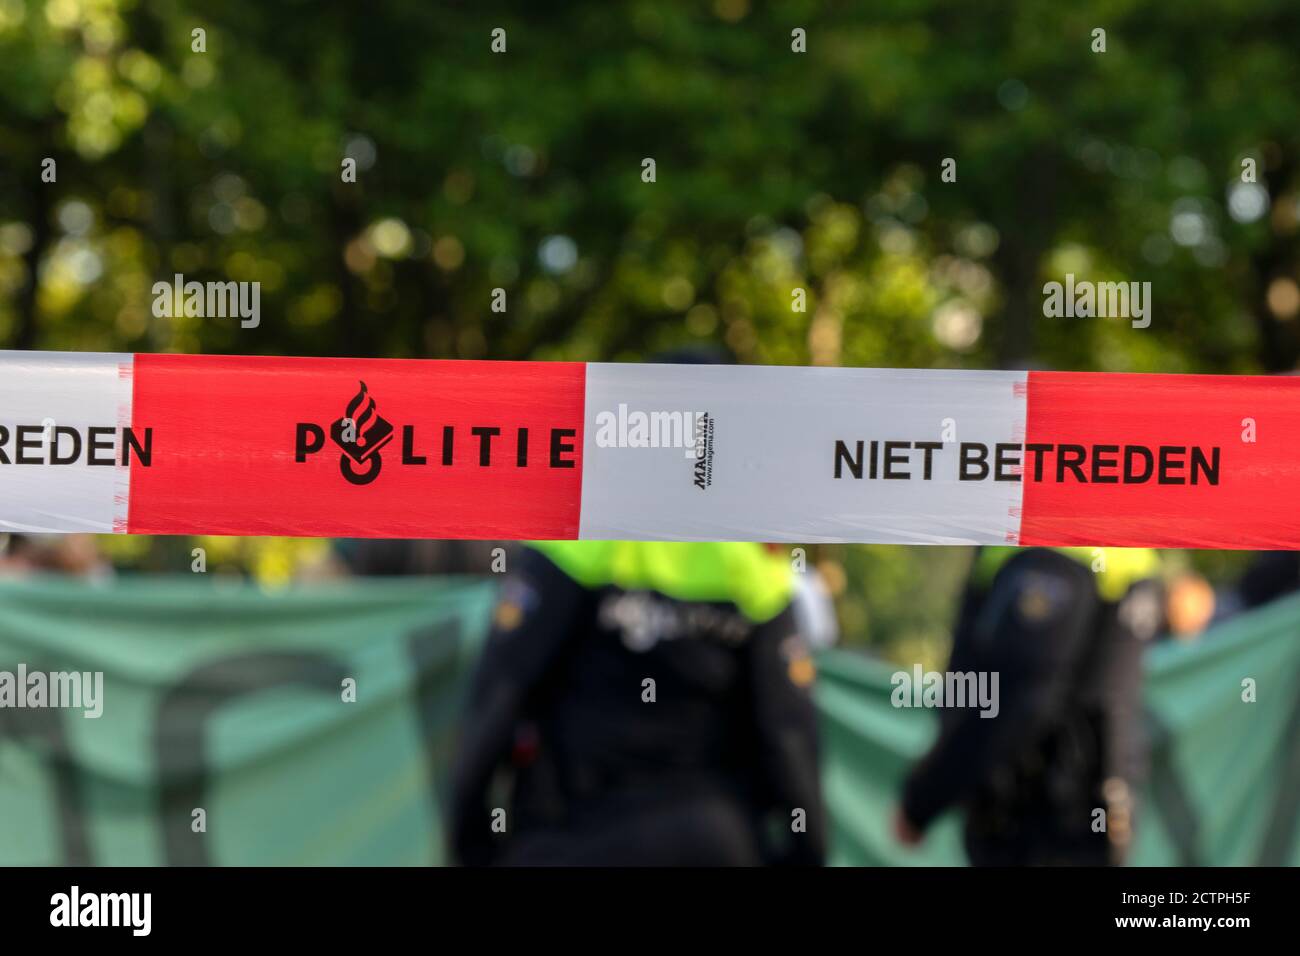 Police Man Behind Ducktape At Amsterdam The Netherlands 21-9-2020 Stock Photo